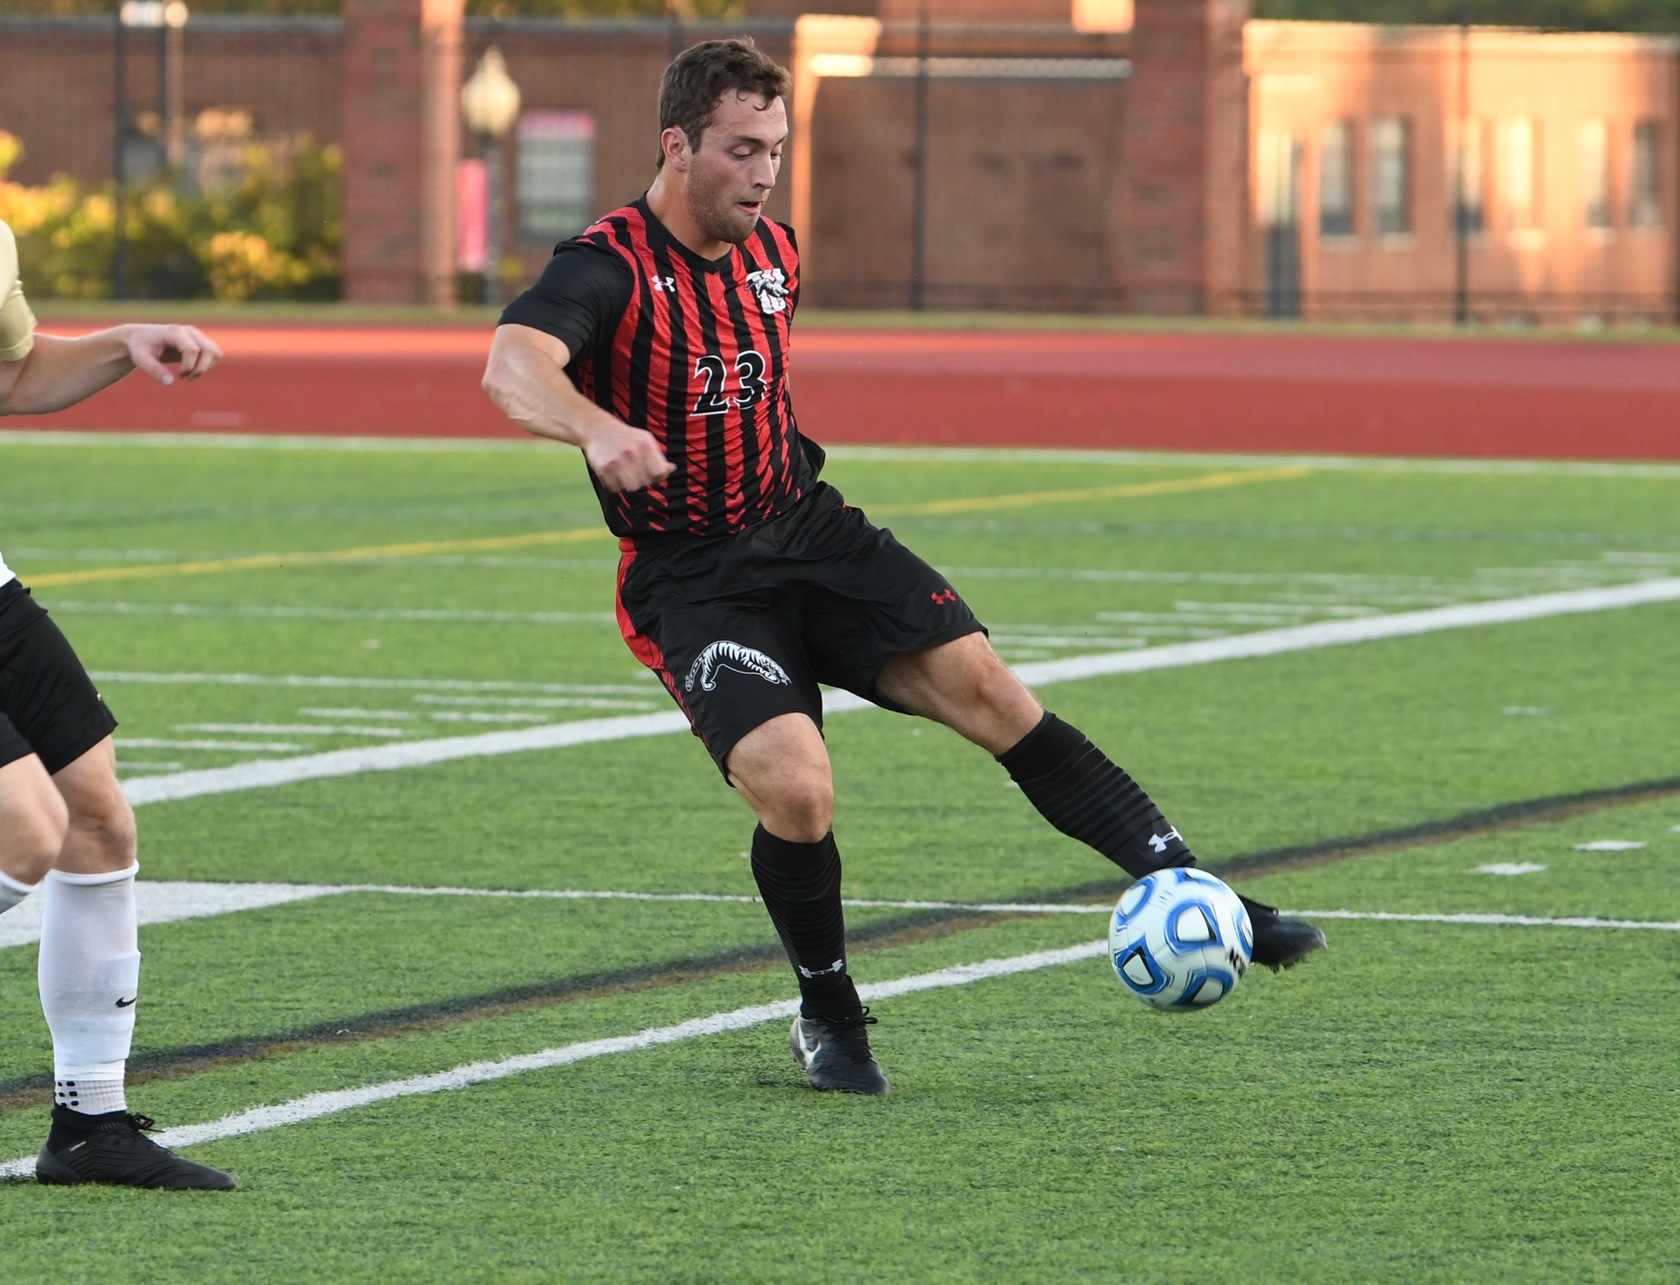 Senior Christian Randazzo and the Wittenberg men's soccer team dropped a 3-0 home decision against No. 22 Ohio Wesleyan on Tuesday night